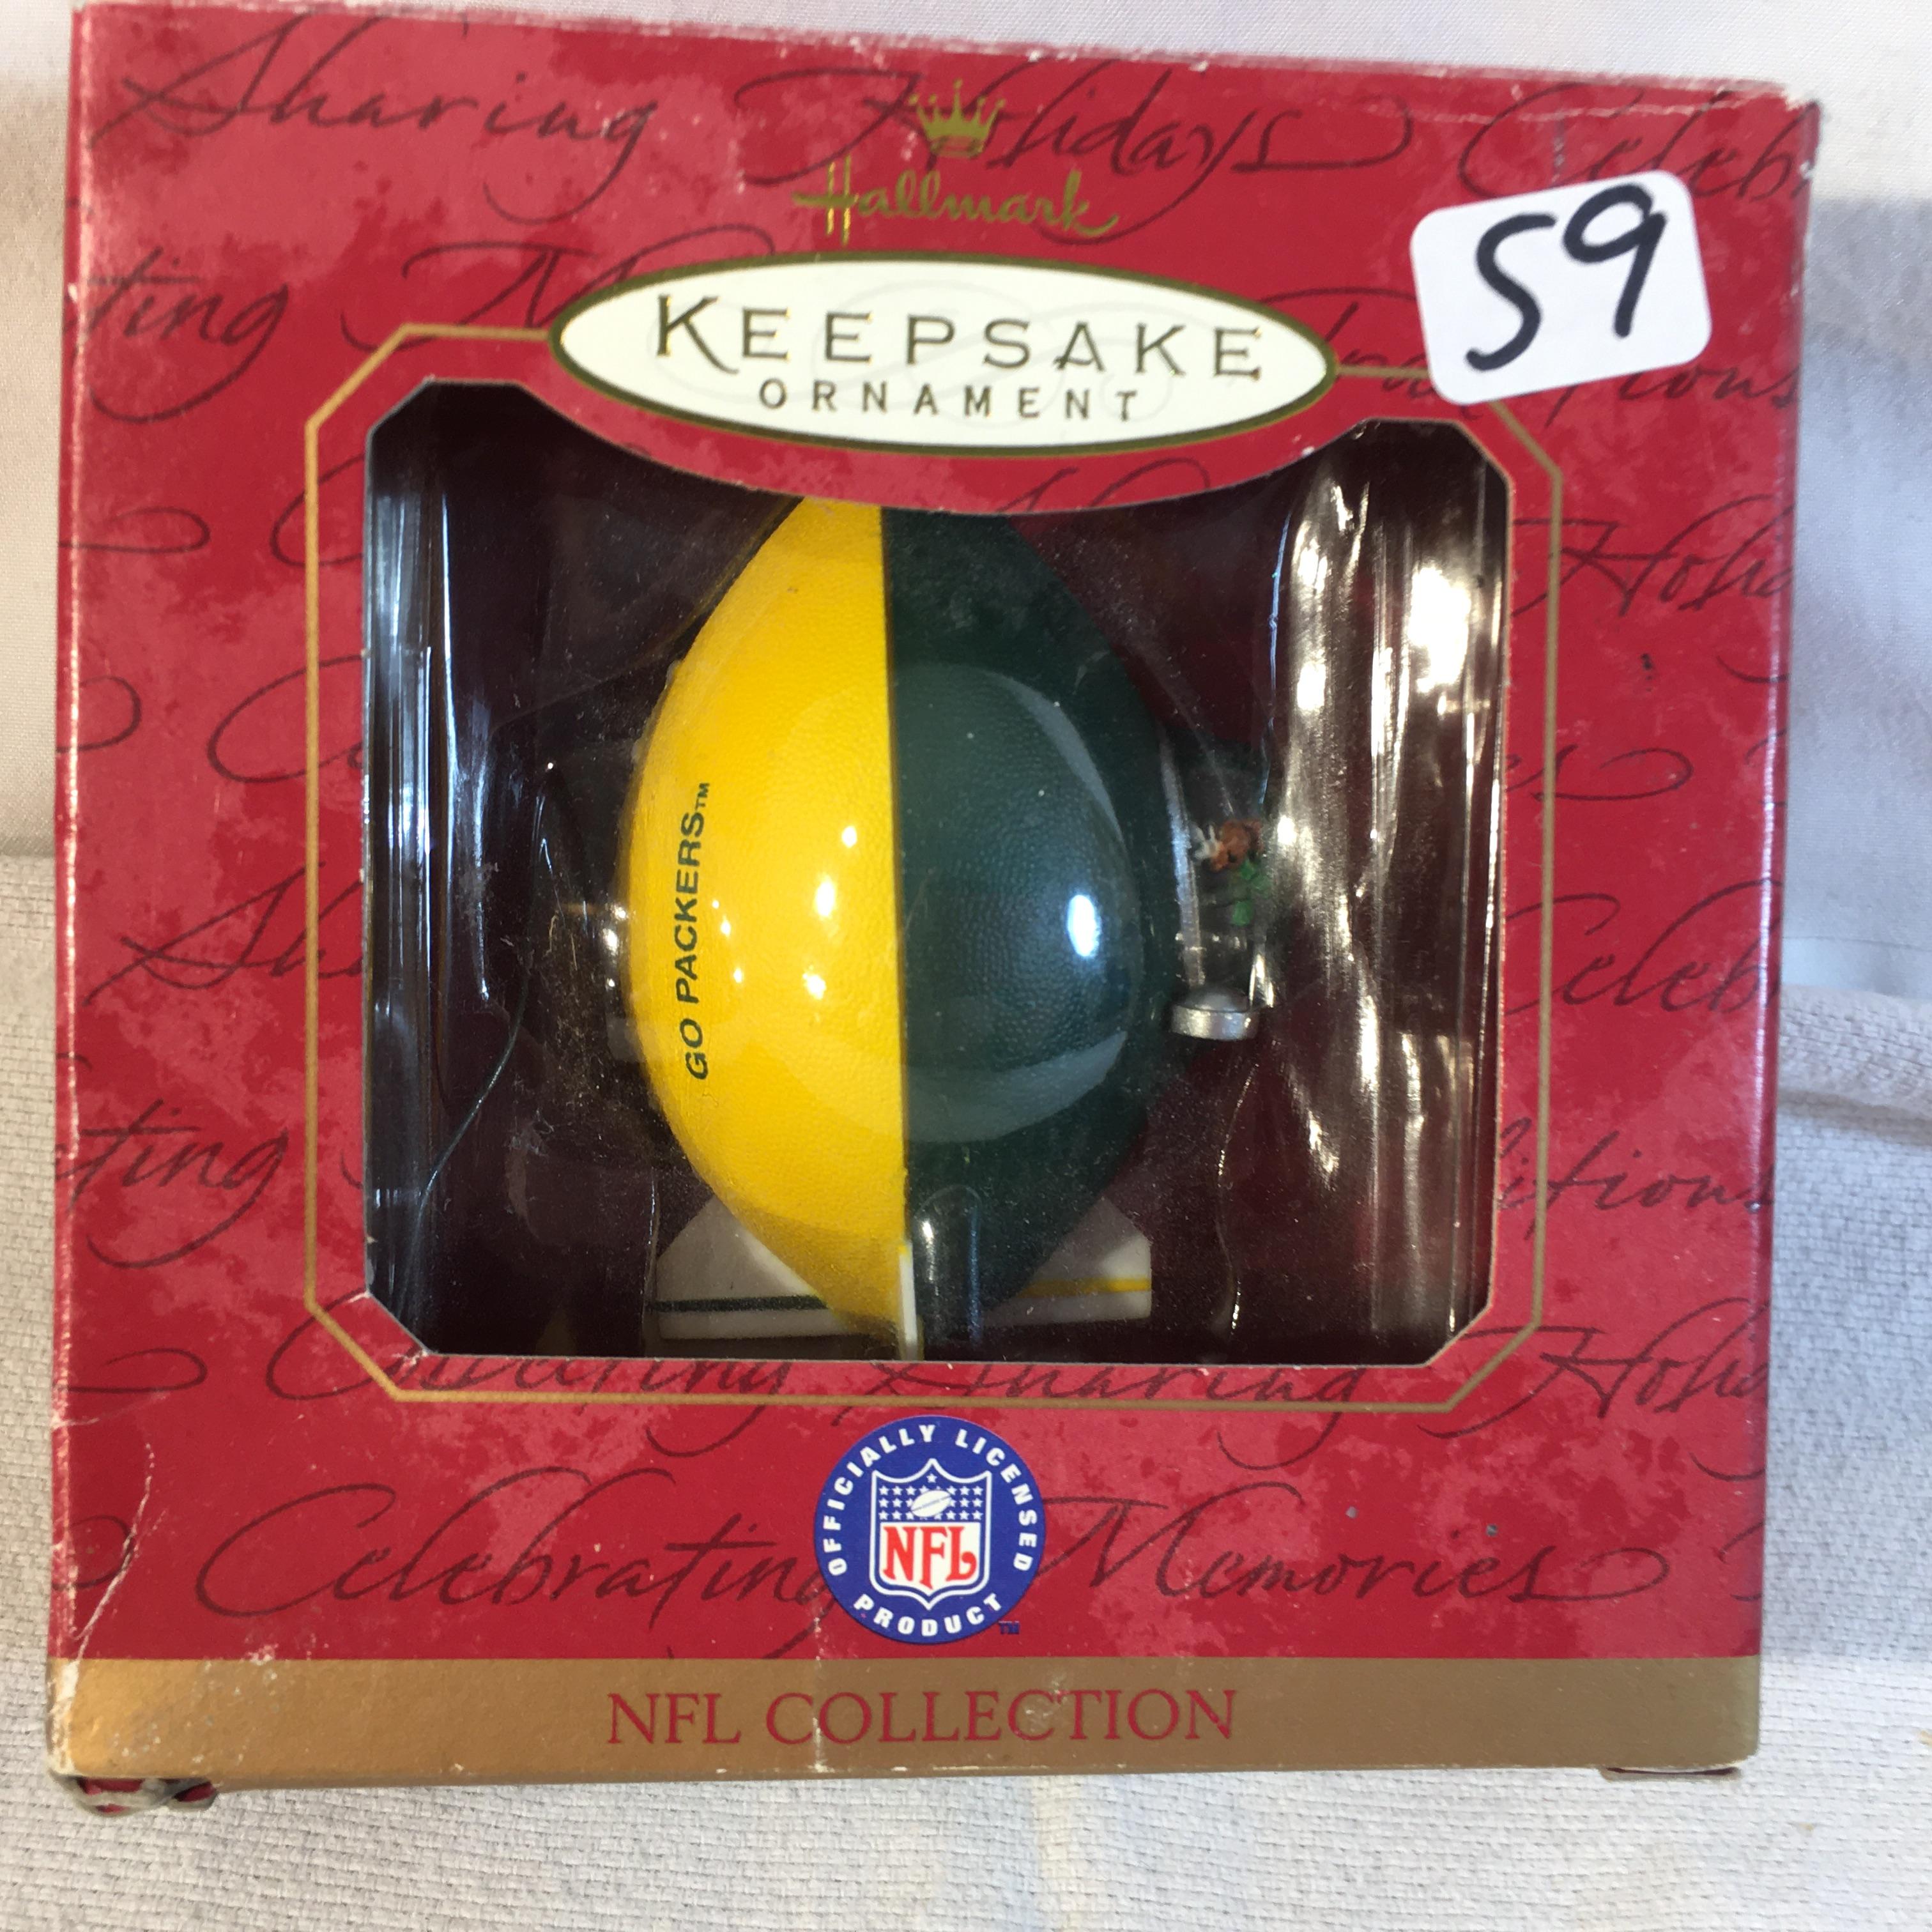 New Collector Halmark Keepsake Ornaments NFL Collection - See Pictures